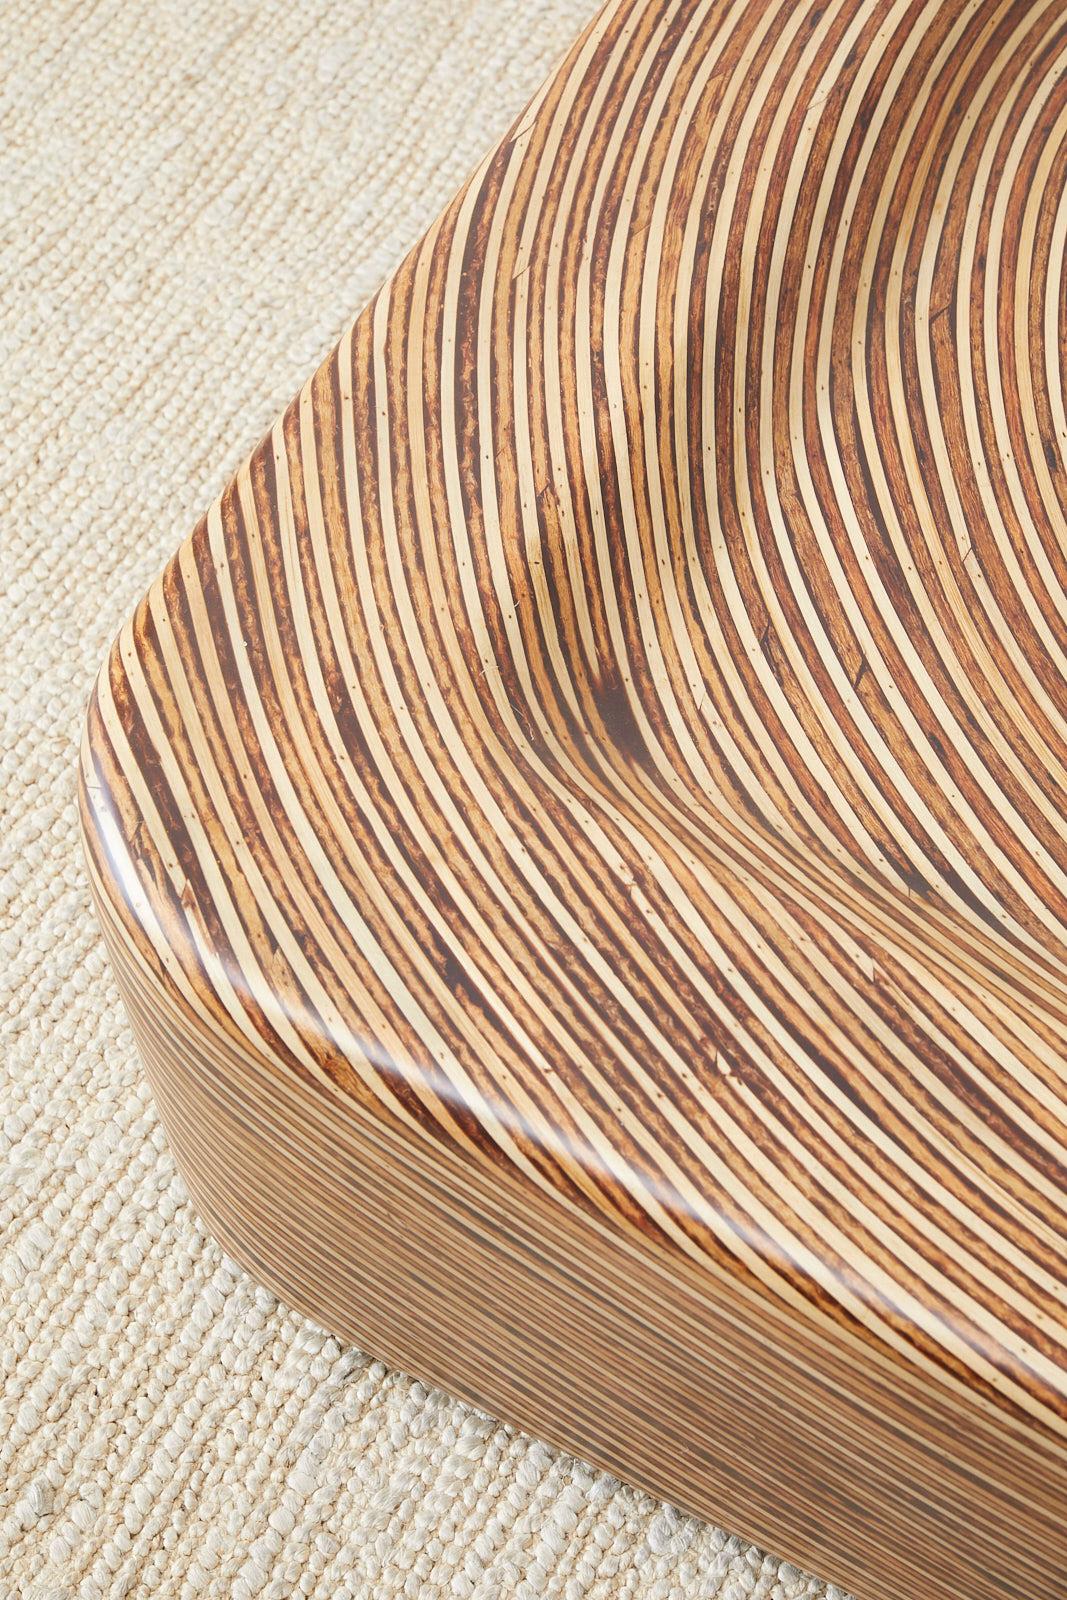 Contemporary Organic Modern Bamboo Rattan Strip Inlay Cocktail Table